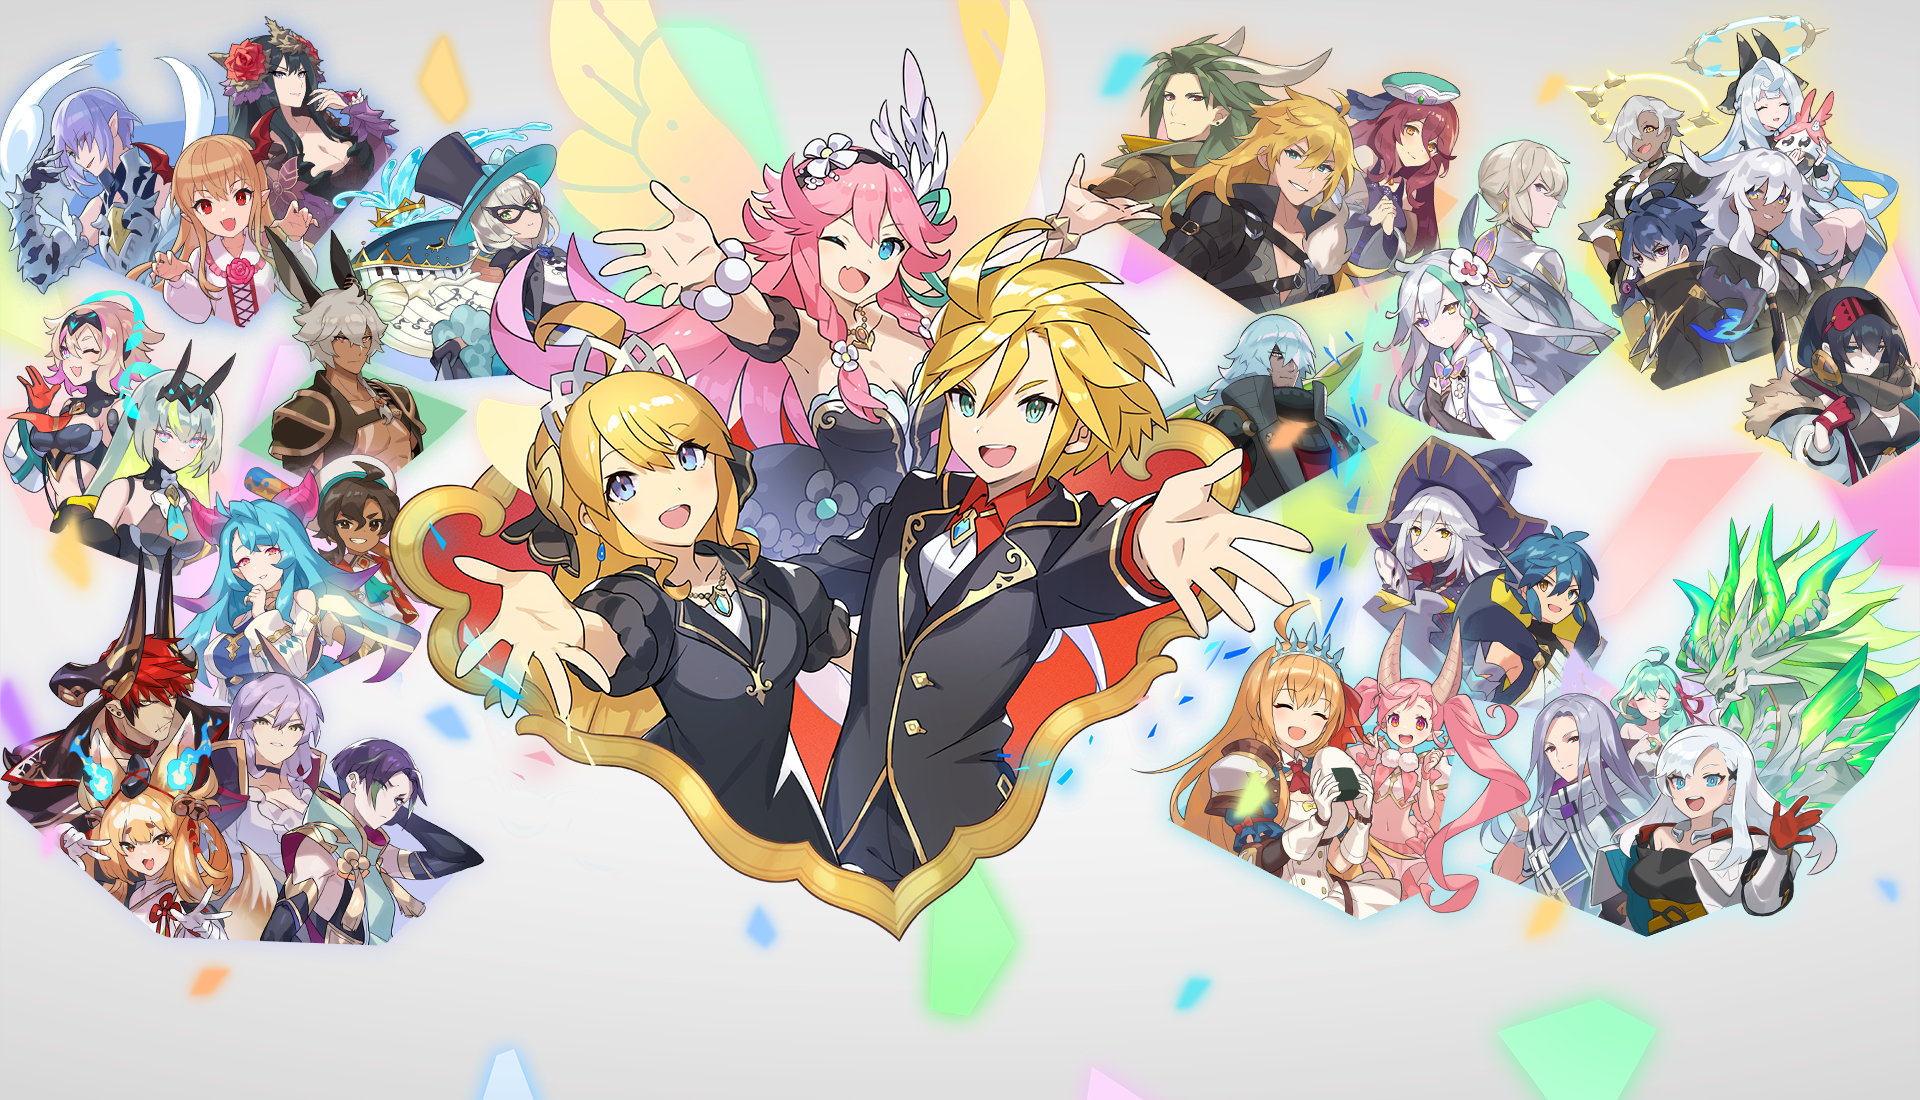 Video Game Dragalia Lost HD Wallpaper | Background Image